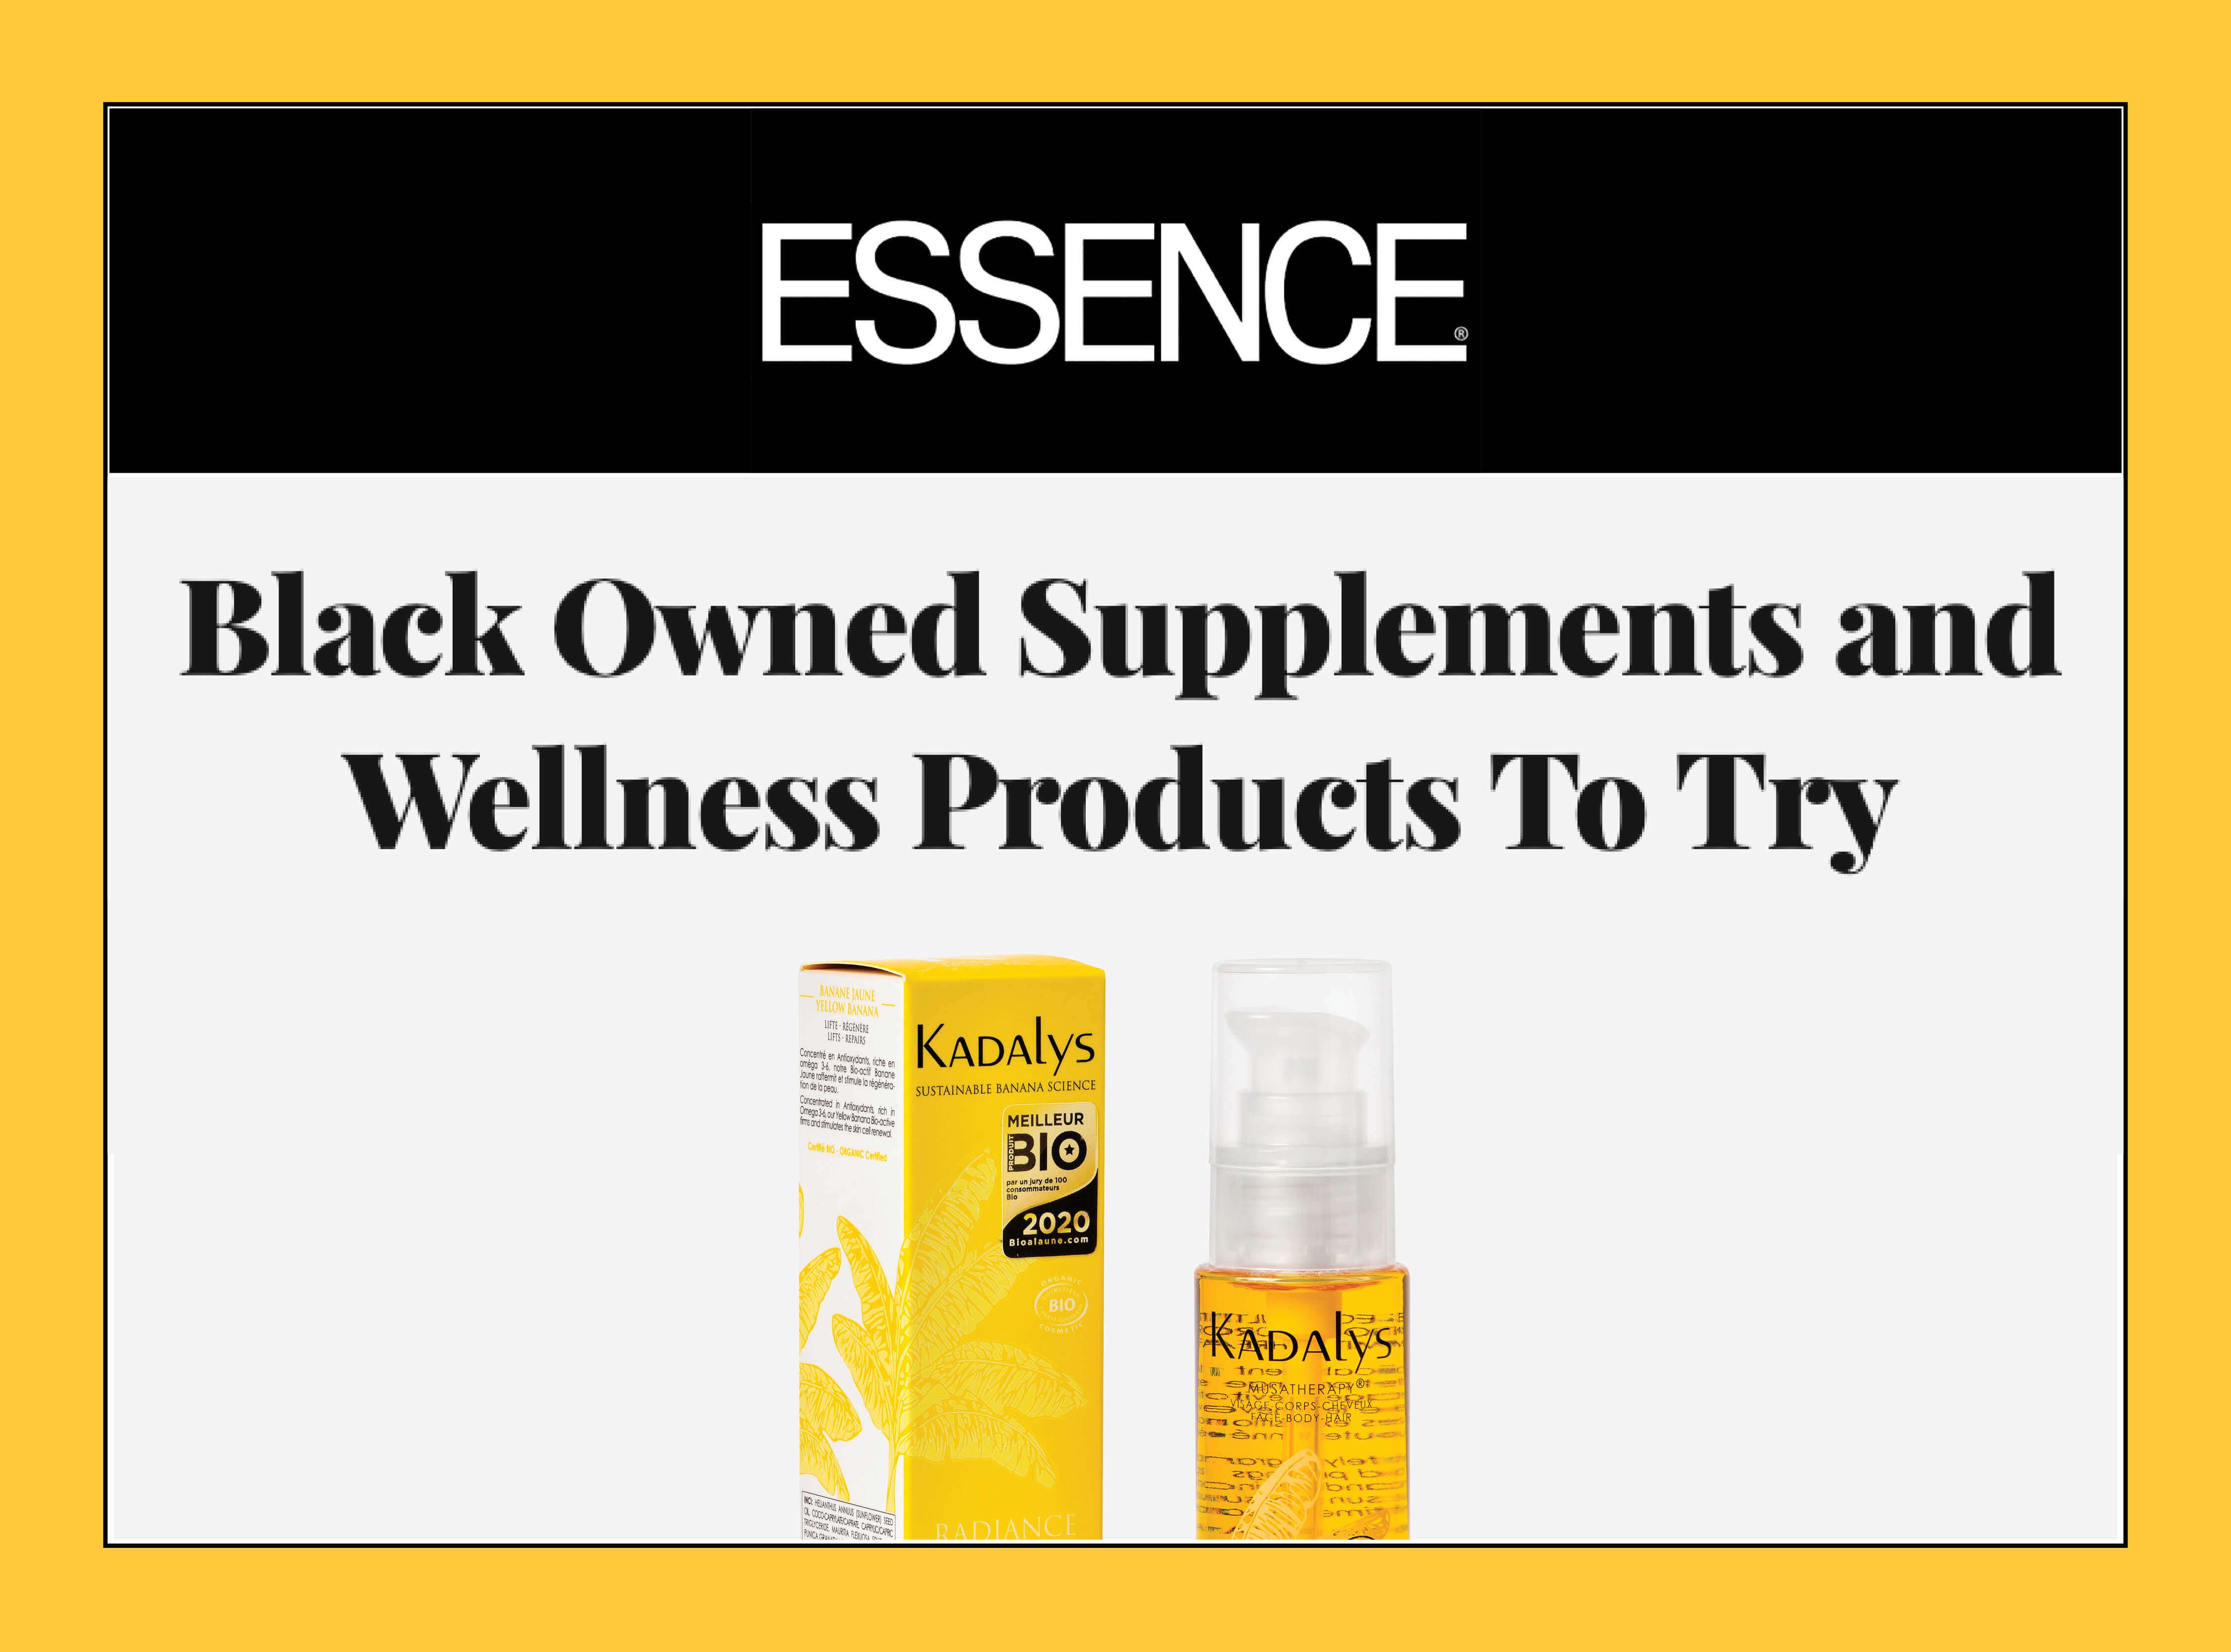 Essence highlight Kadalys as a a Black owned brand that is "worth the money and support."